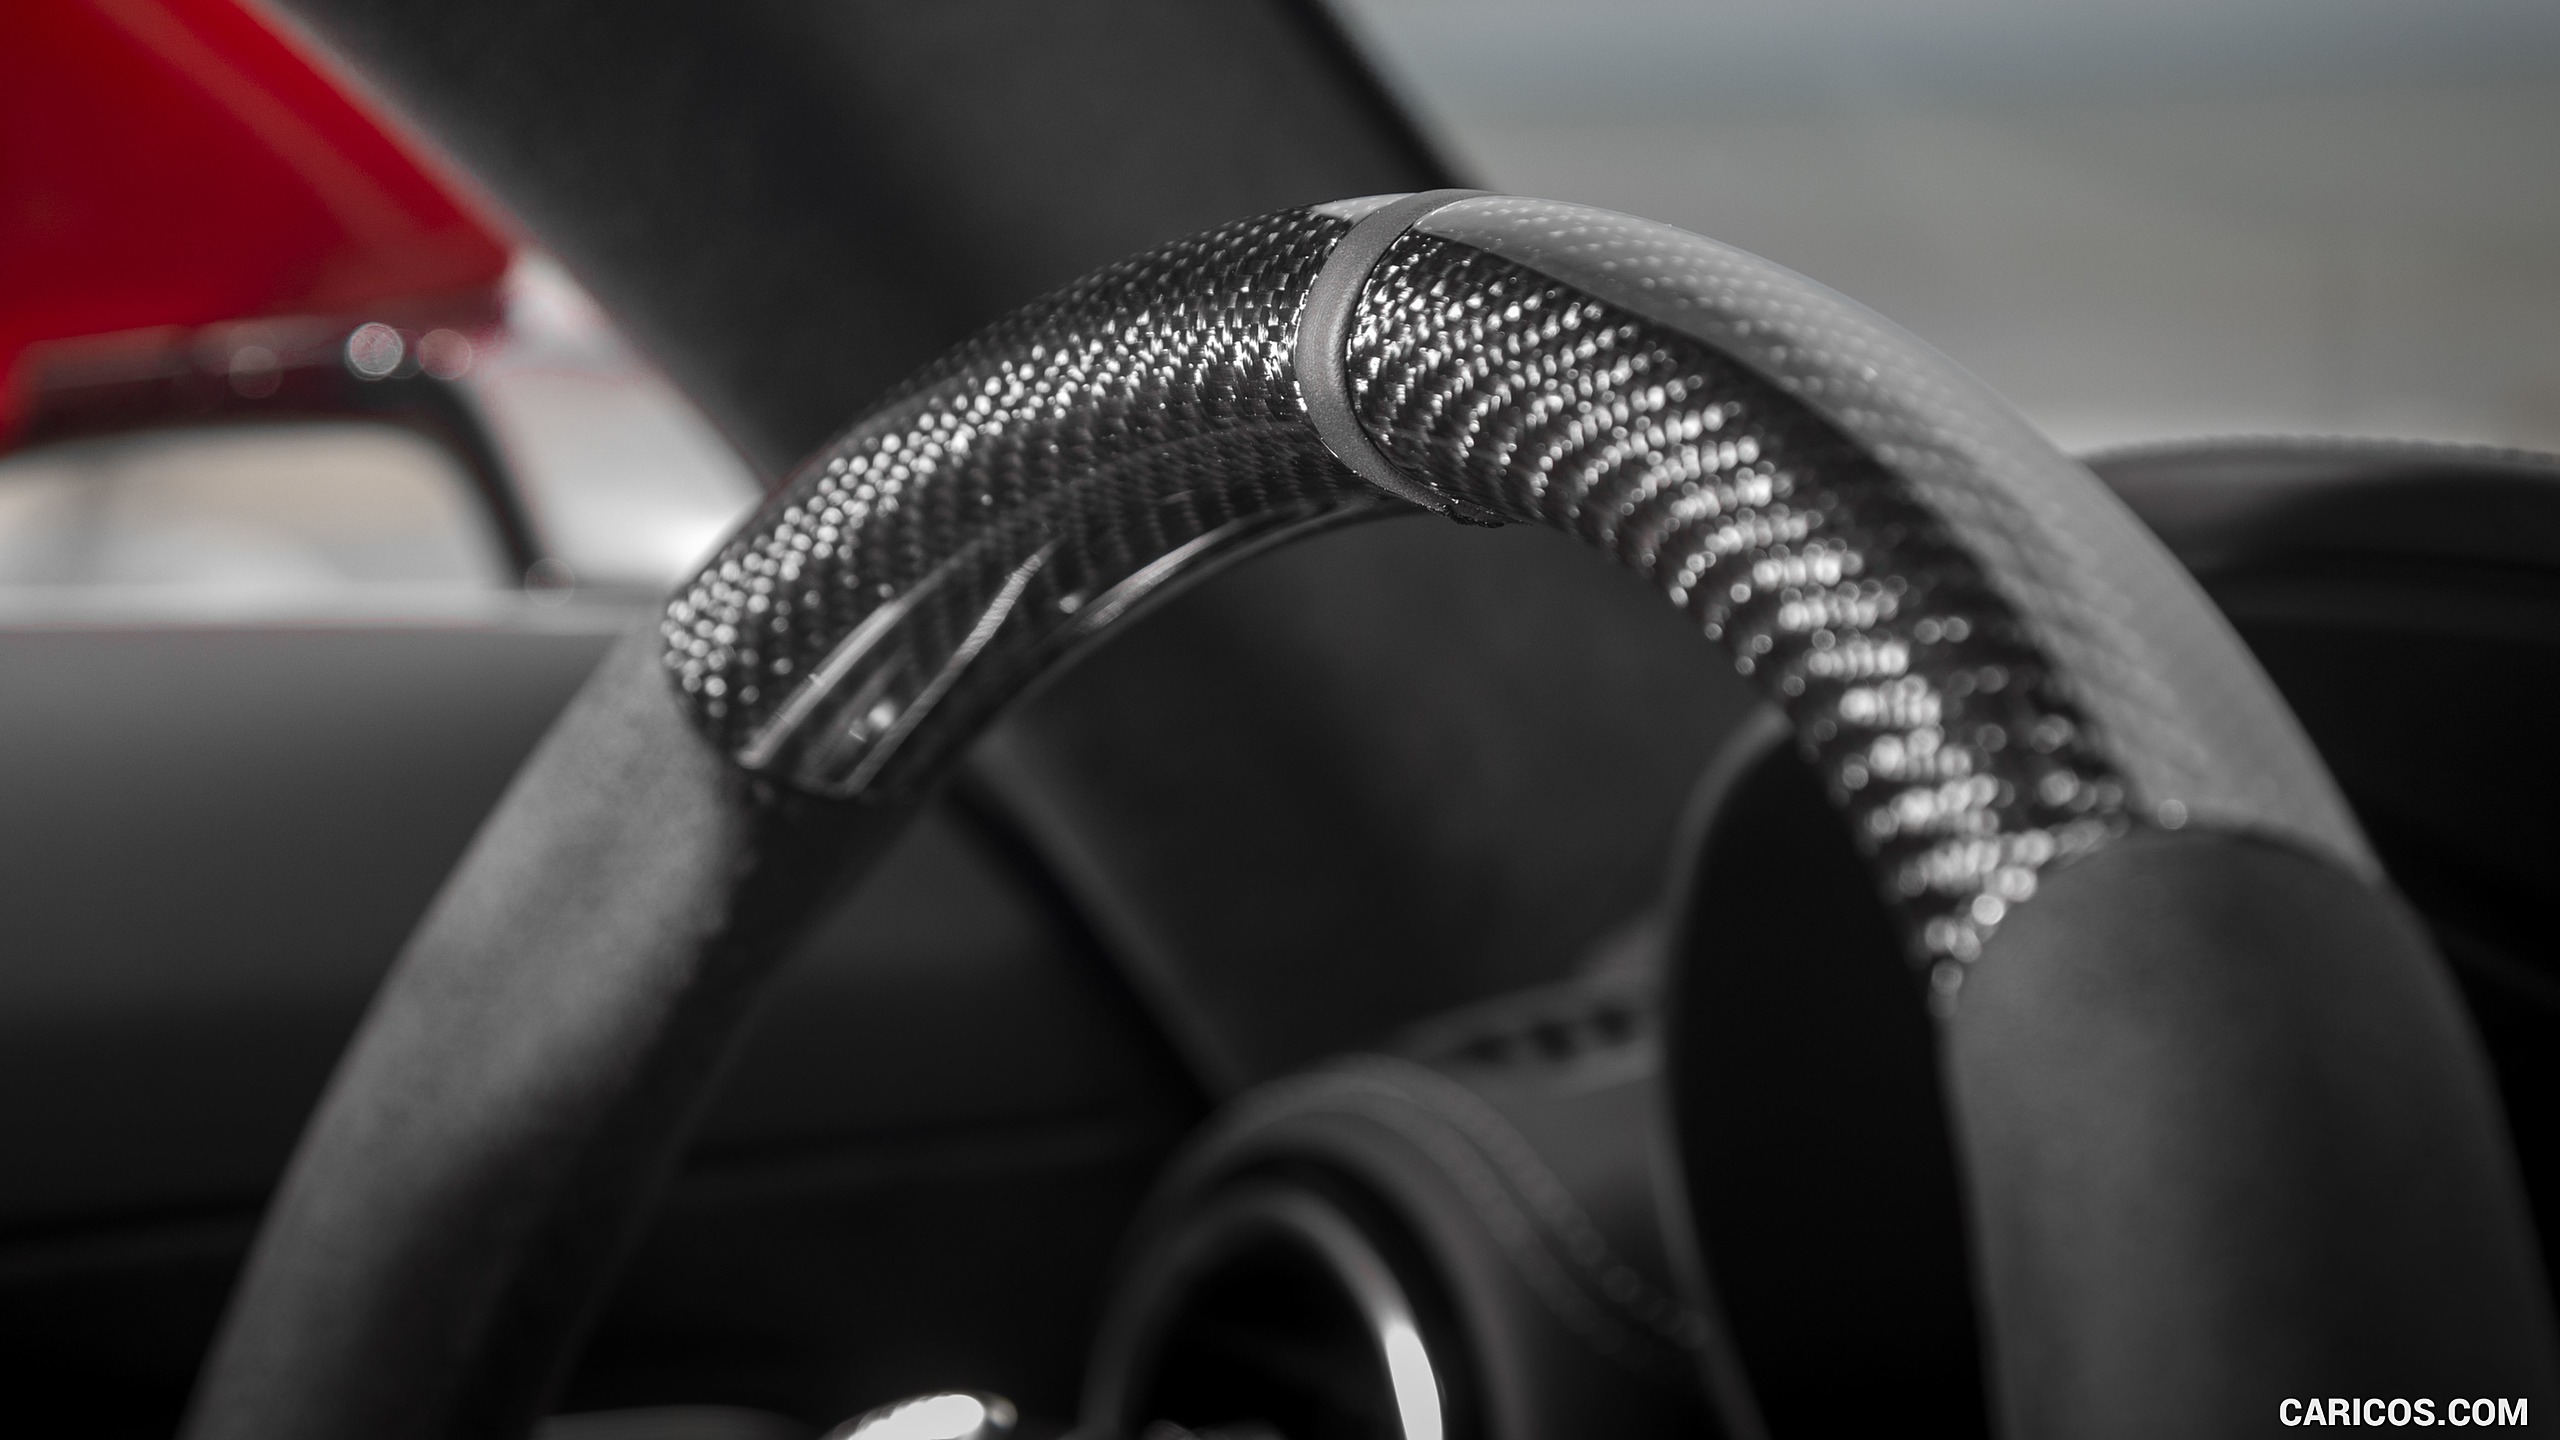 2020 Mercedes-AMG GT C Coupe (US-Spec) - Interior, Detail, #189 of 328